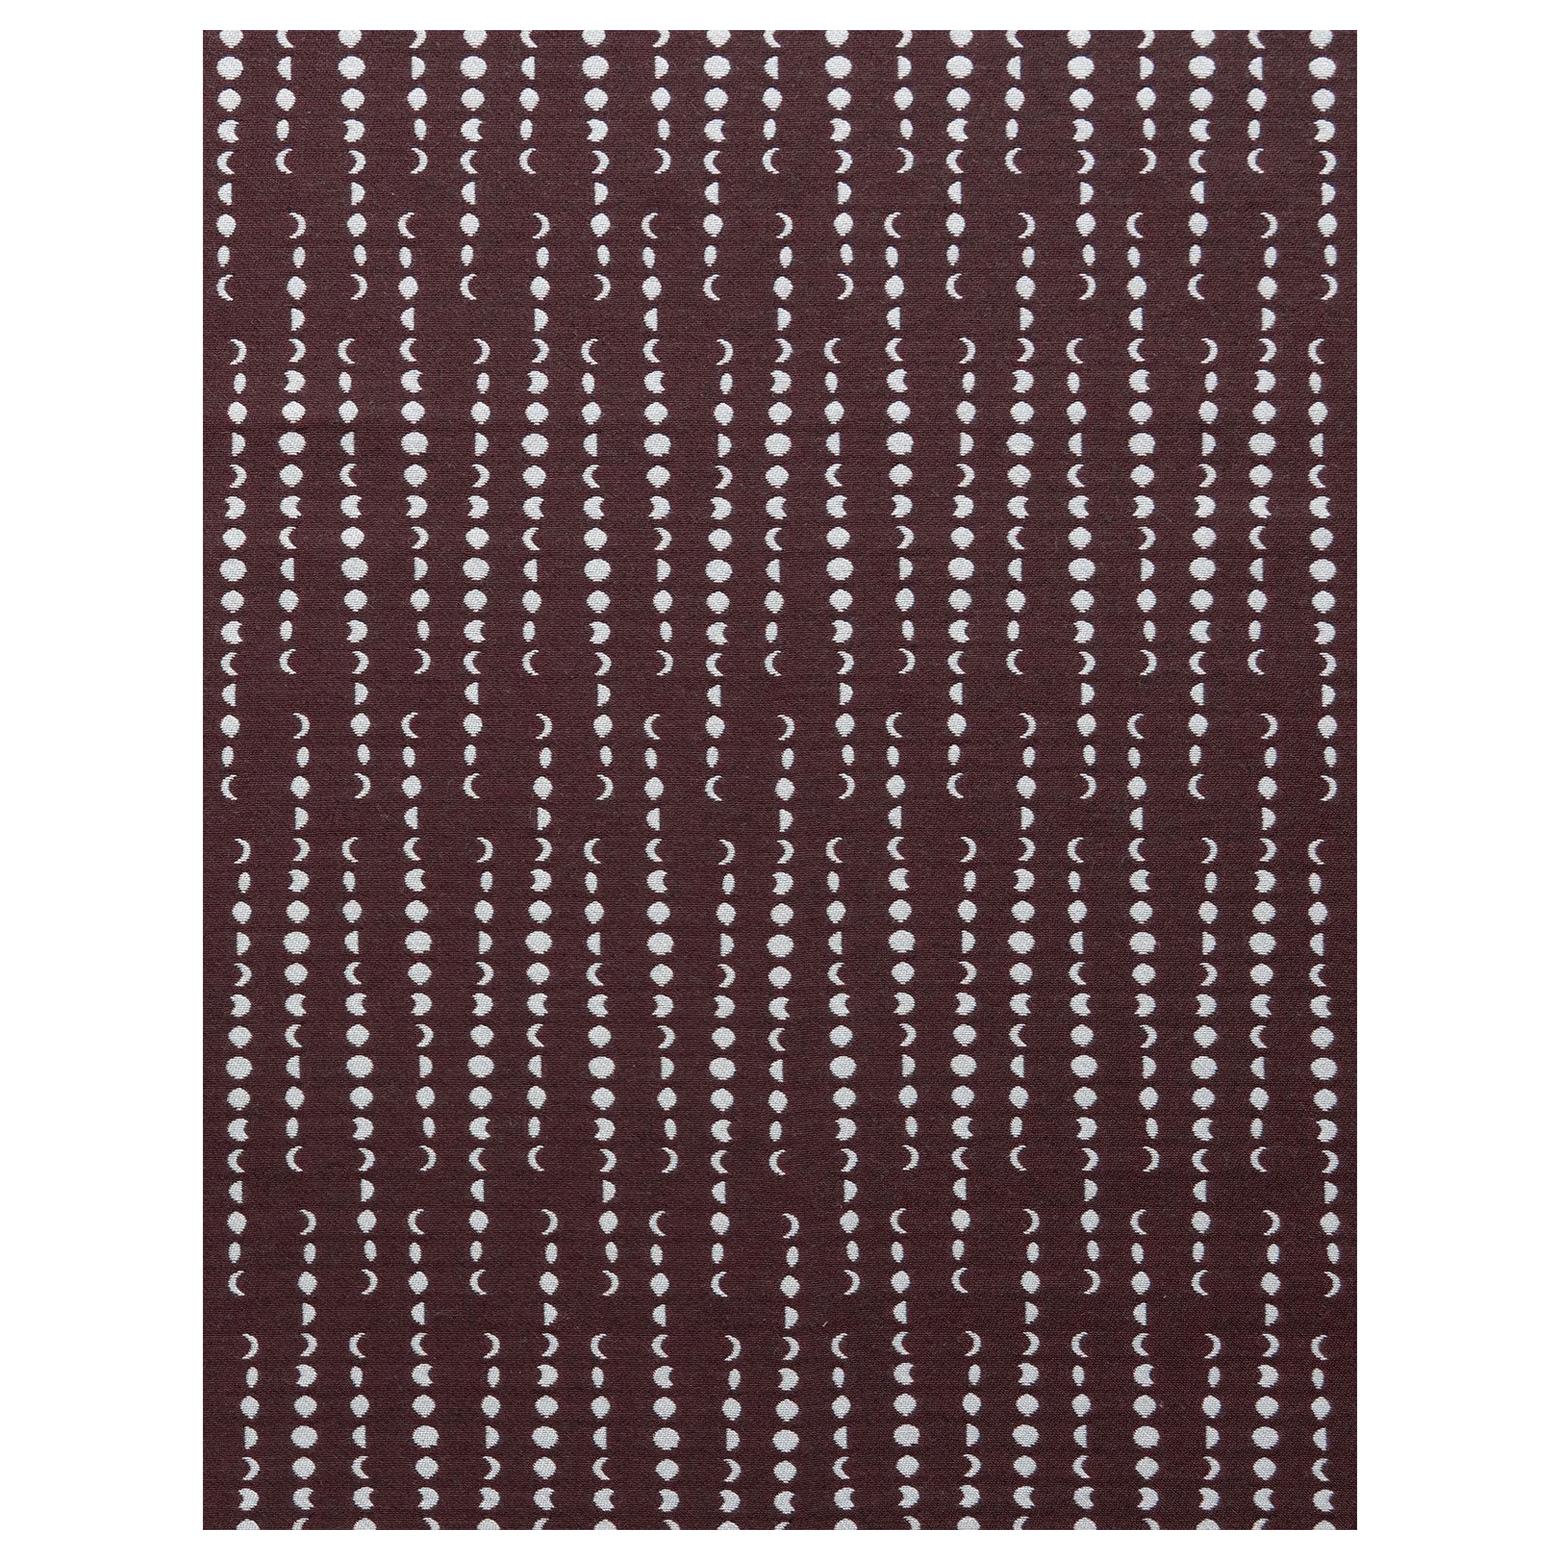 Earthlight Moon Woven Commercial Grade Fabric in Astra:: Grau und Burgundy